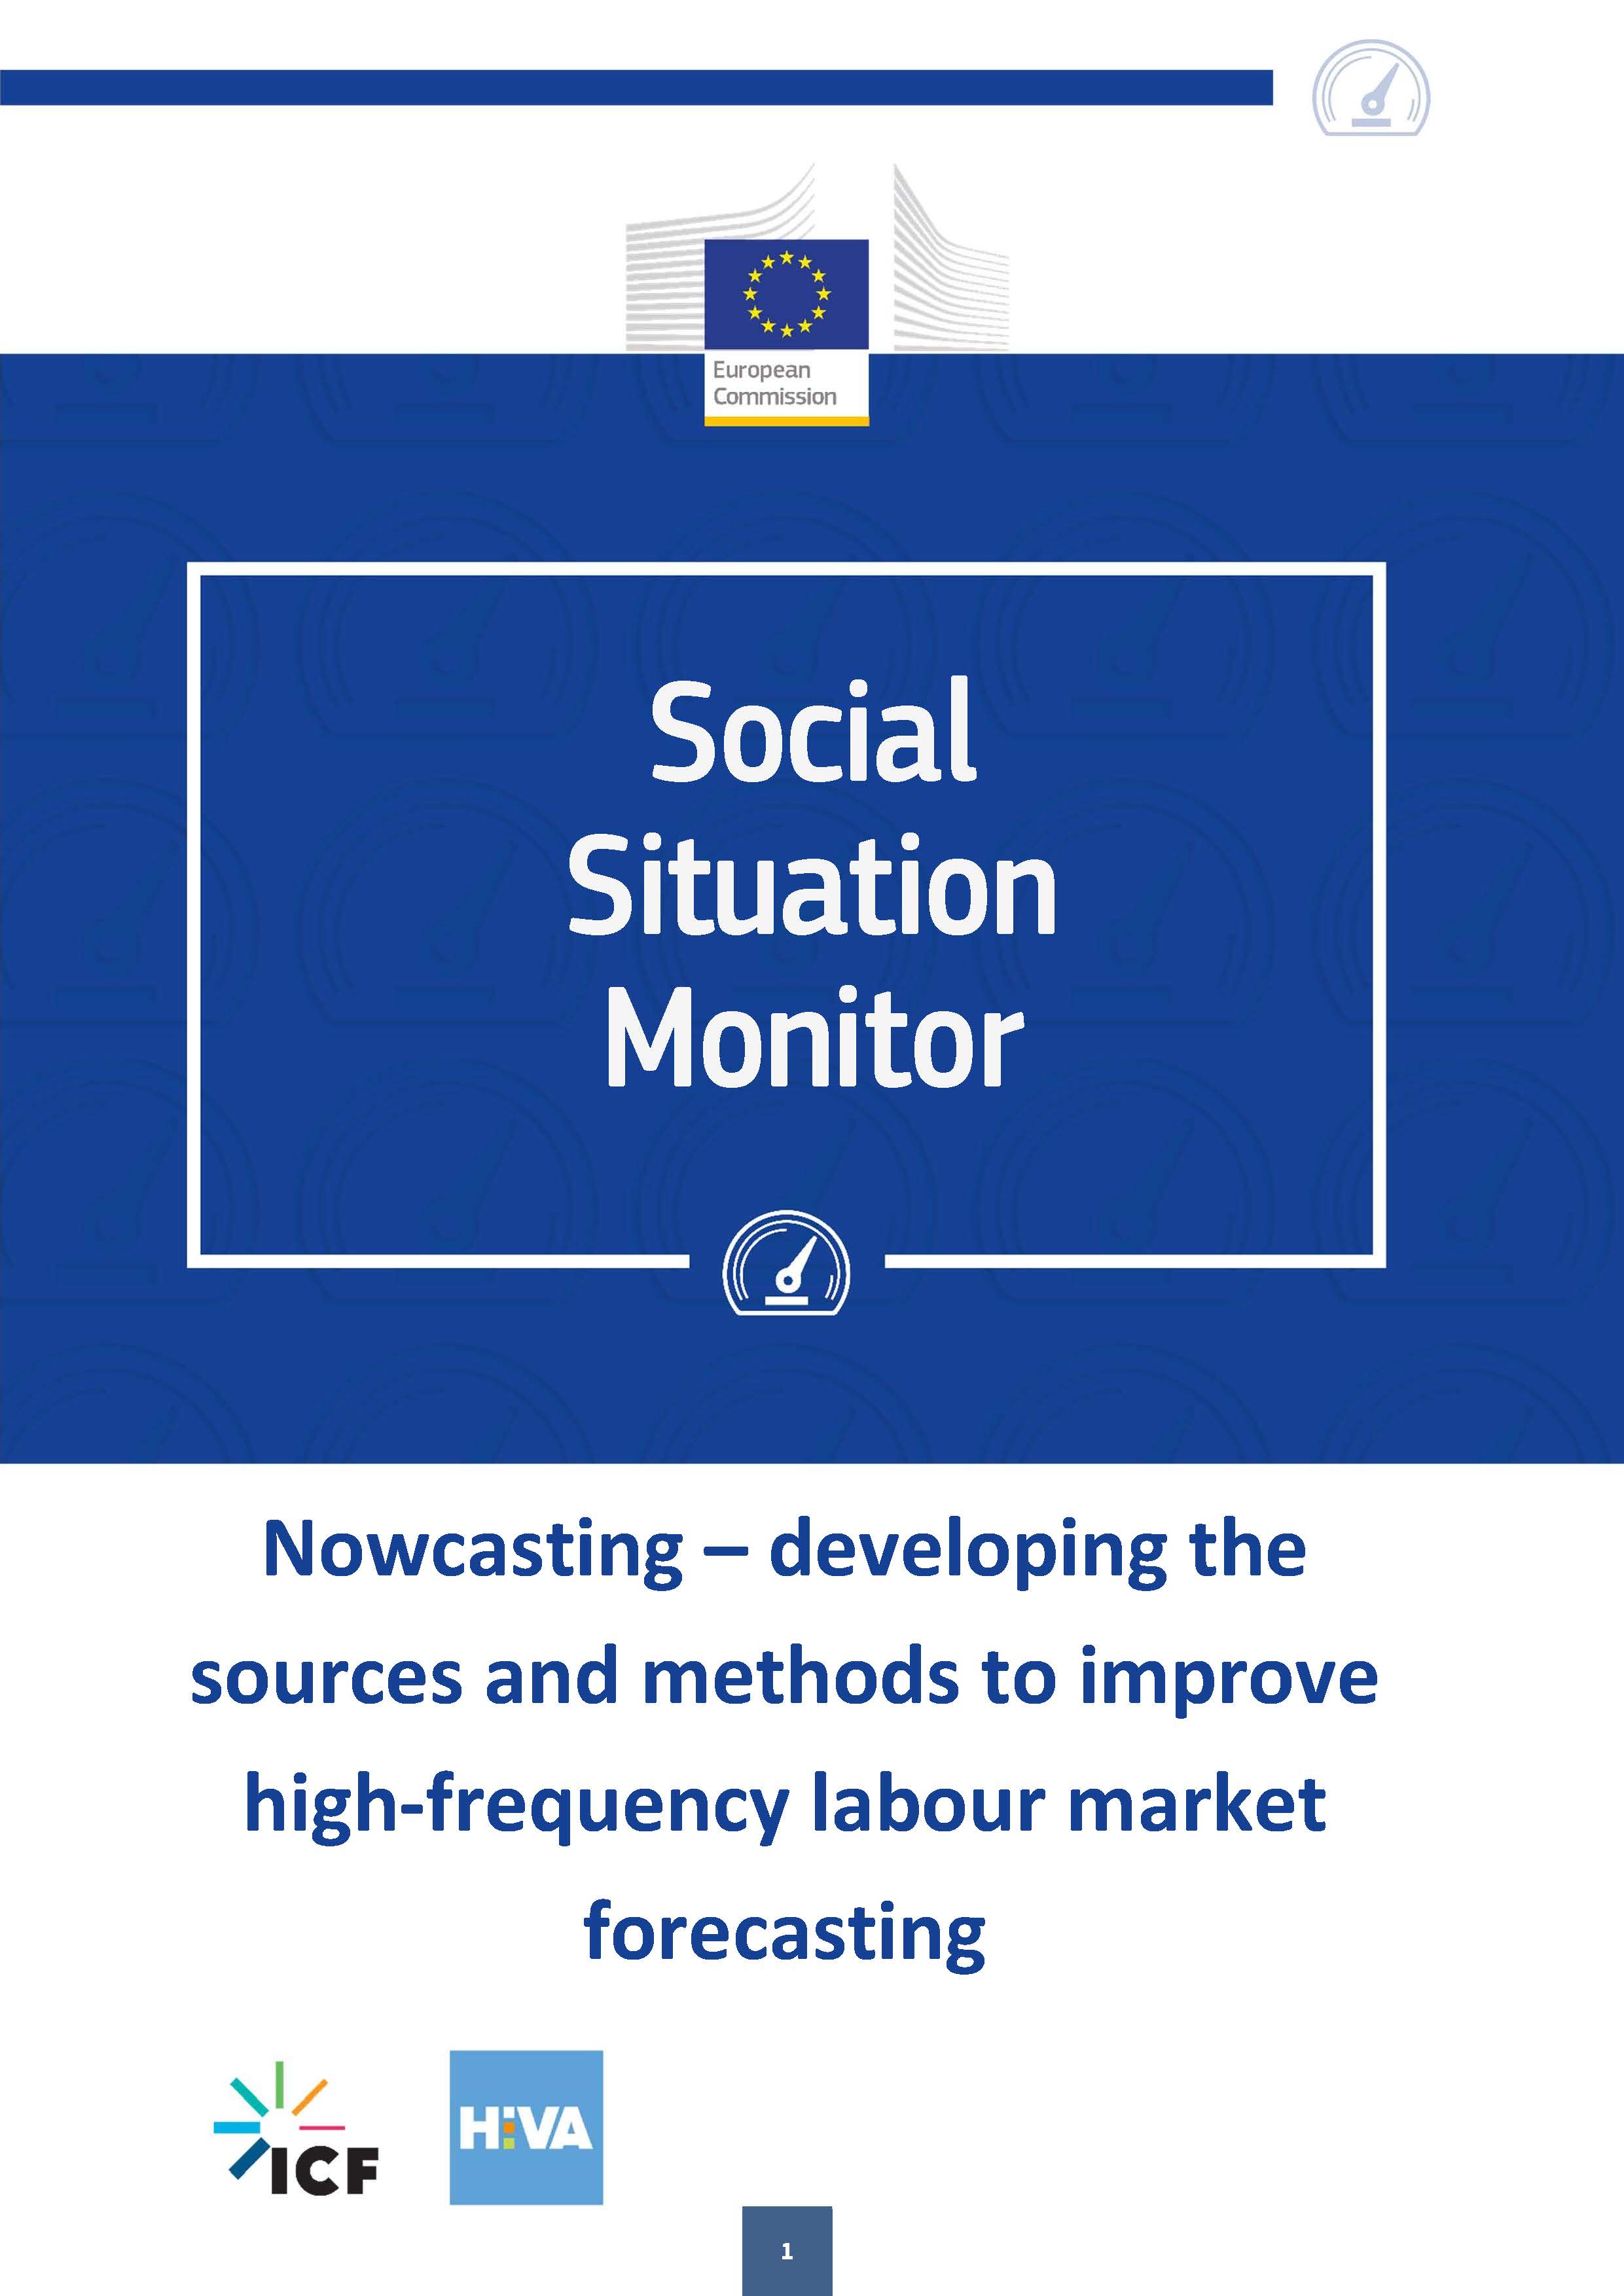 Nowcasting – developing the sources and methods to improve high-frequency labour market forecasting